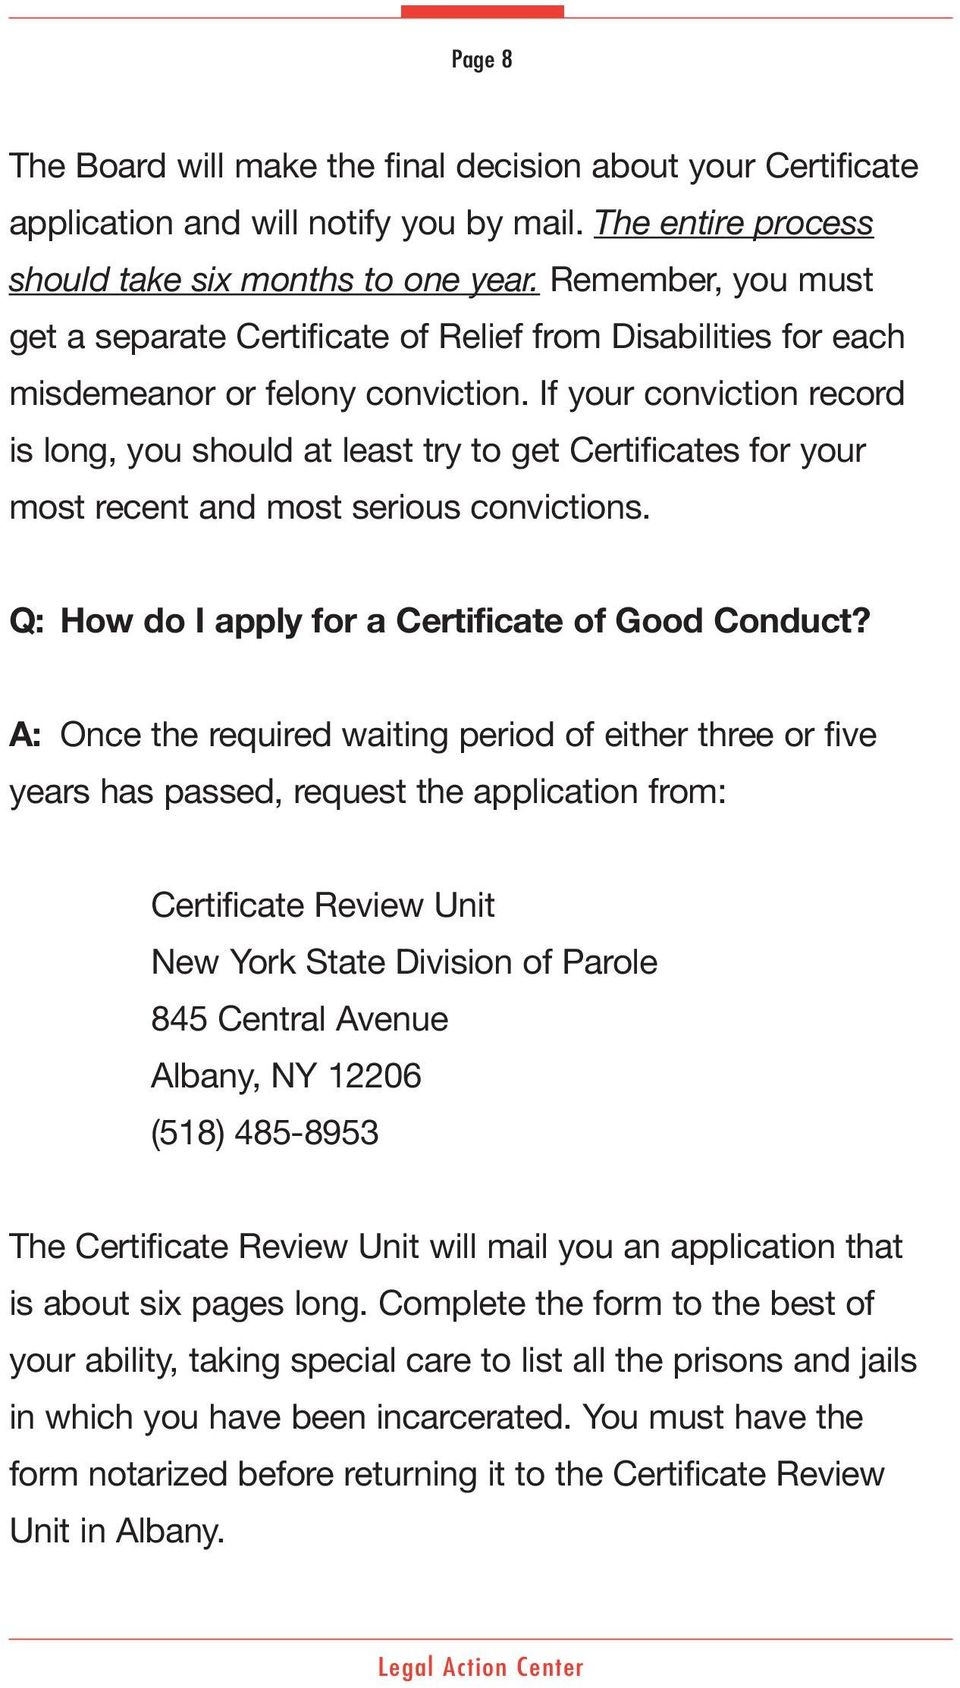 If your conviction record is long, you should at least try to get Certificates for your most recent and most serious convictions. Q: How do I apply for a Certificate of Good Conduct?